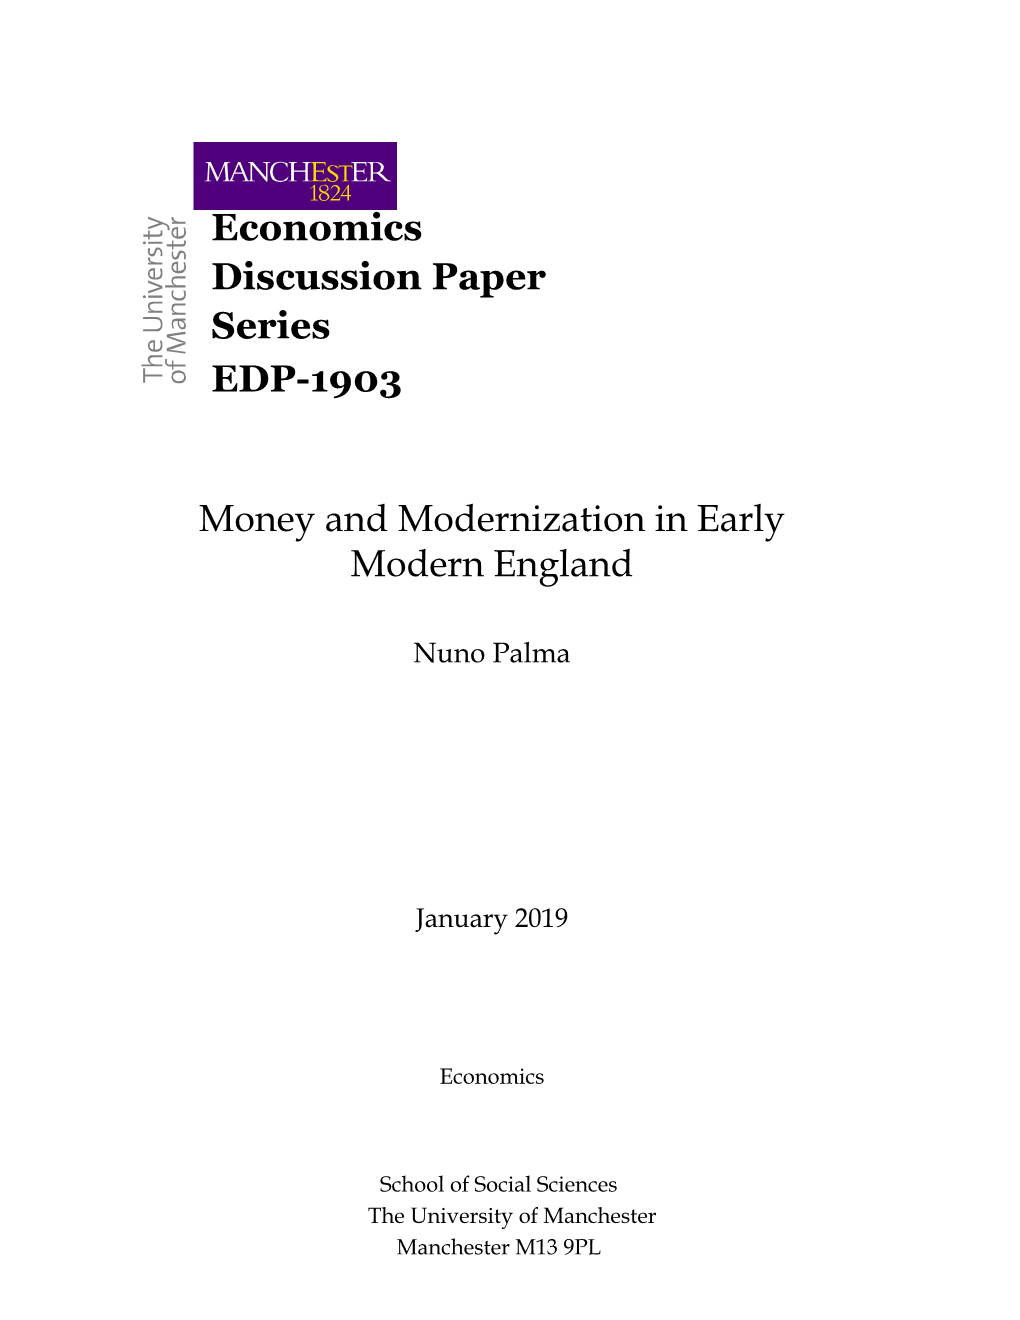 Money and Modernization in Early Modern England